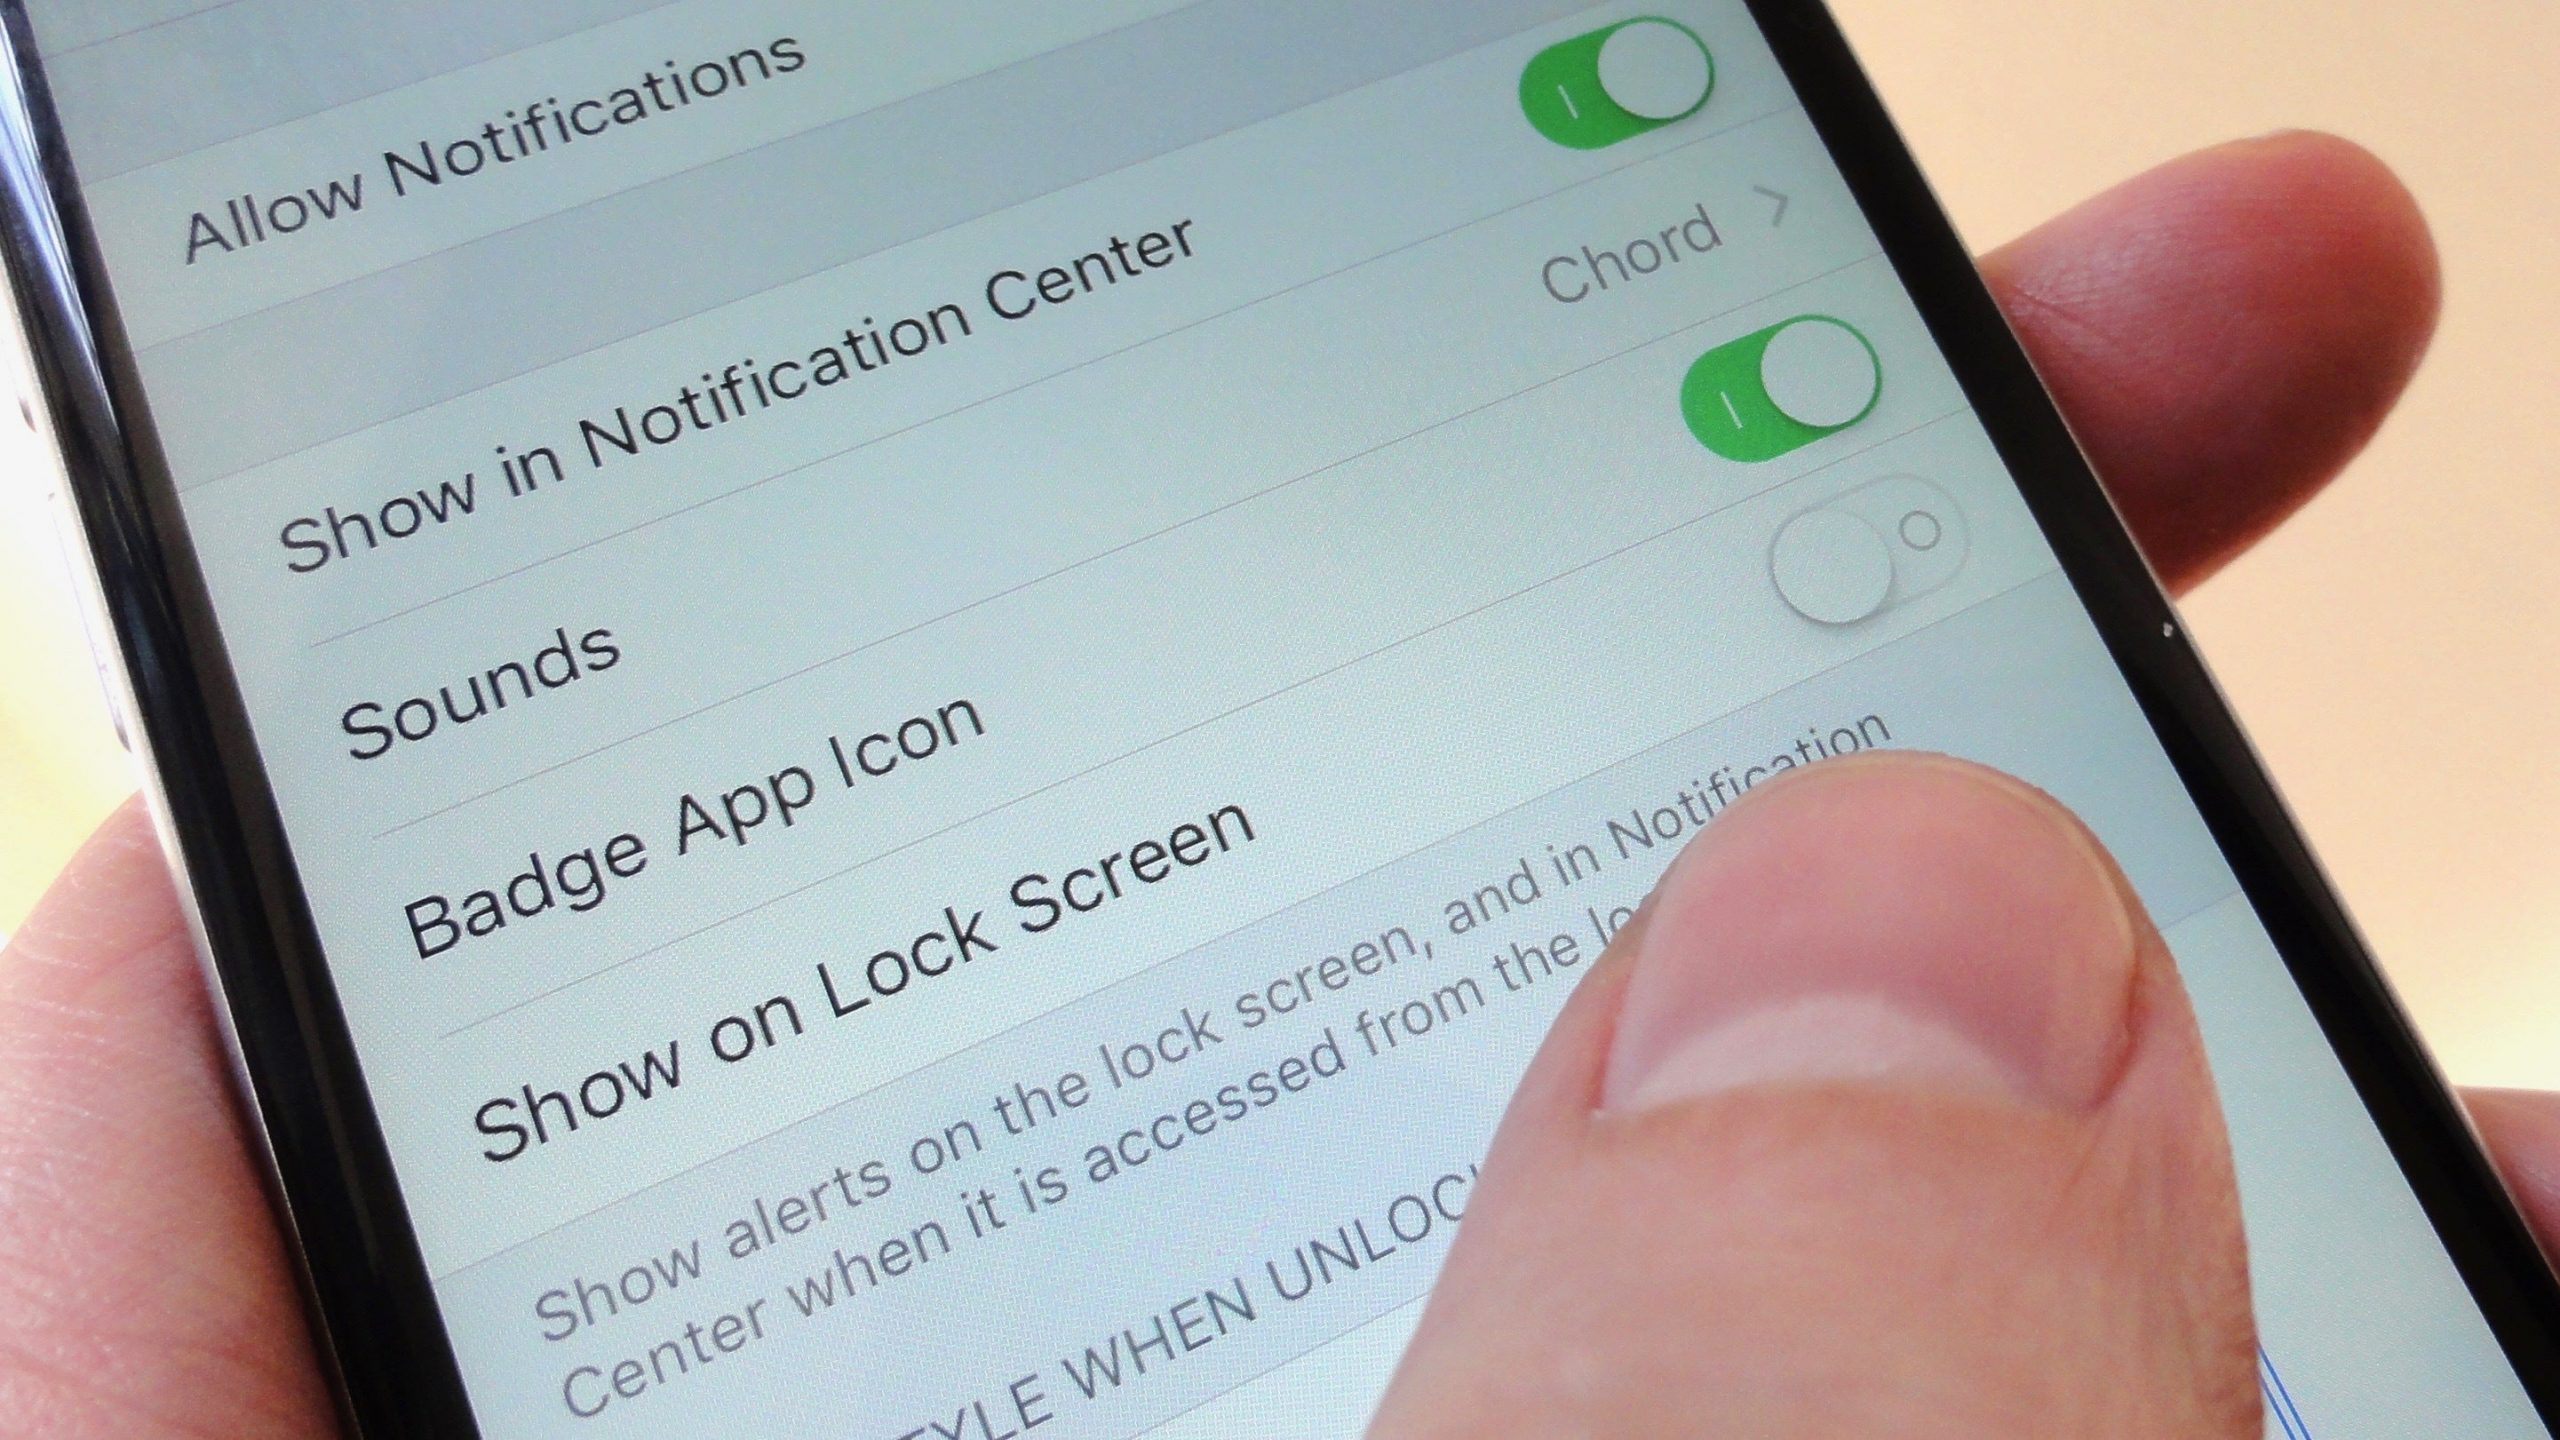 6 ways to lock down your iPhoneâs lock screen